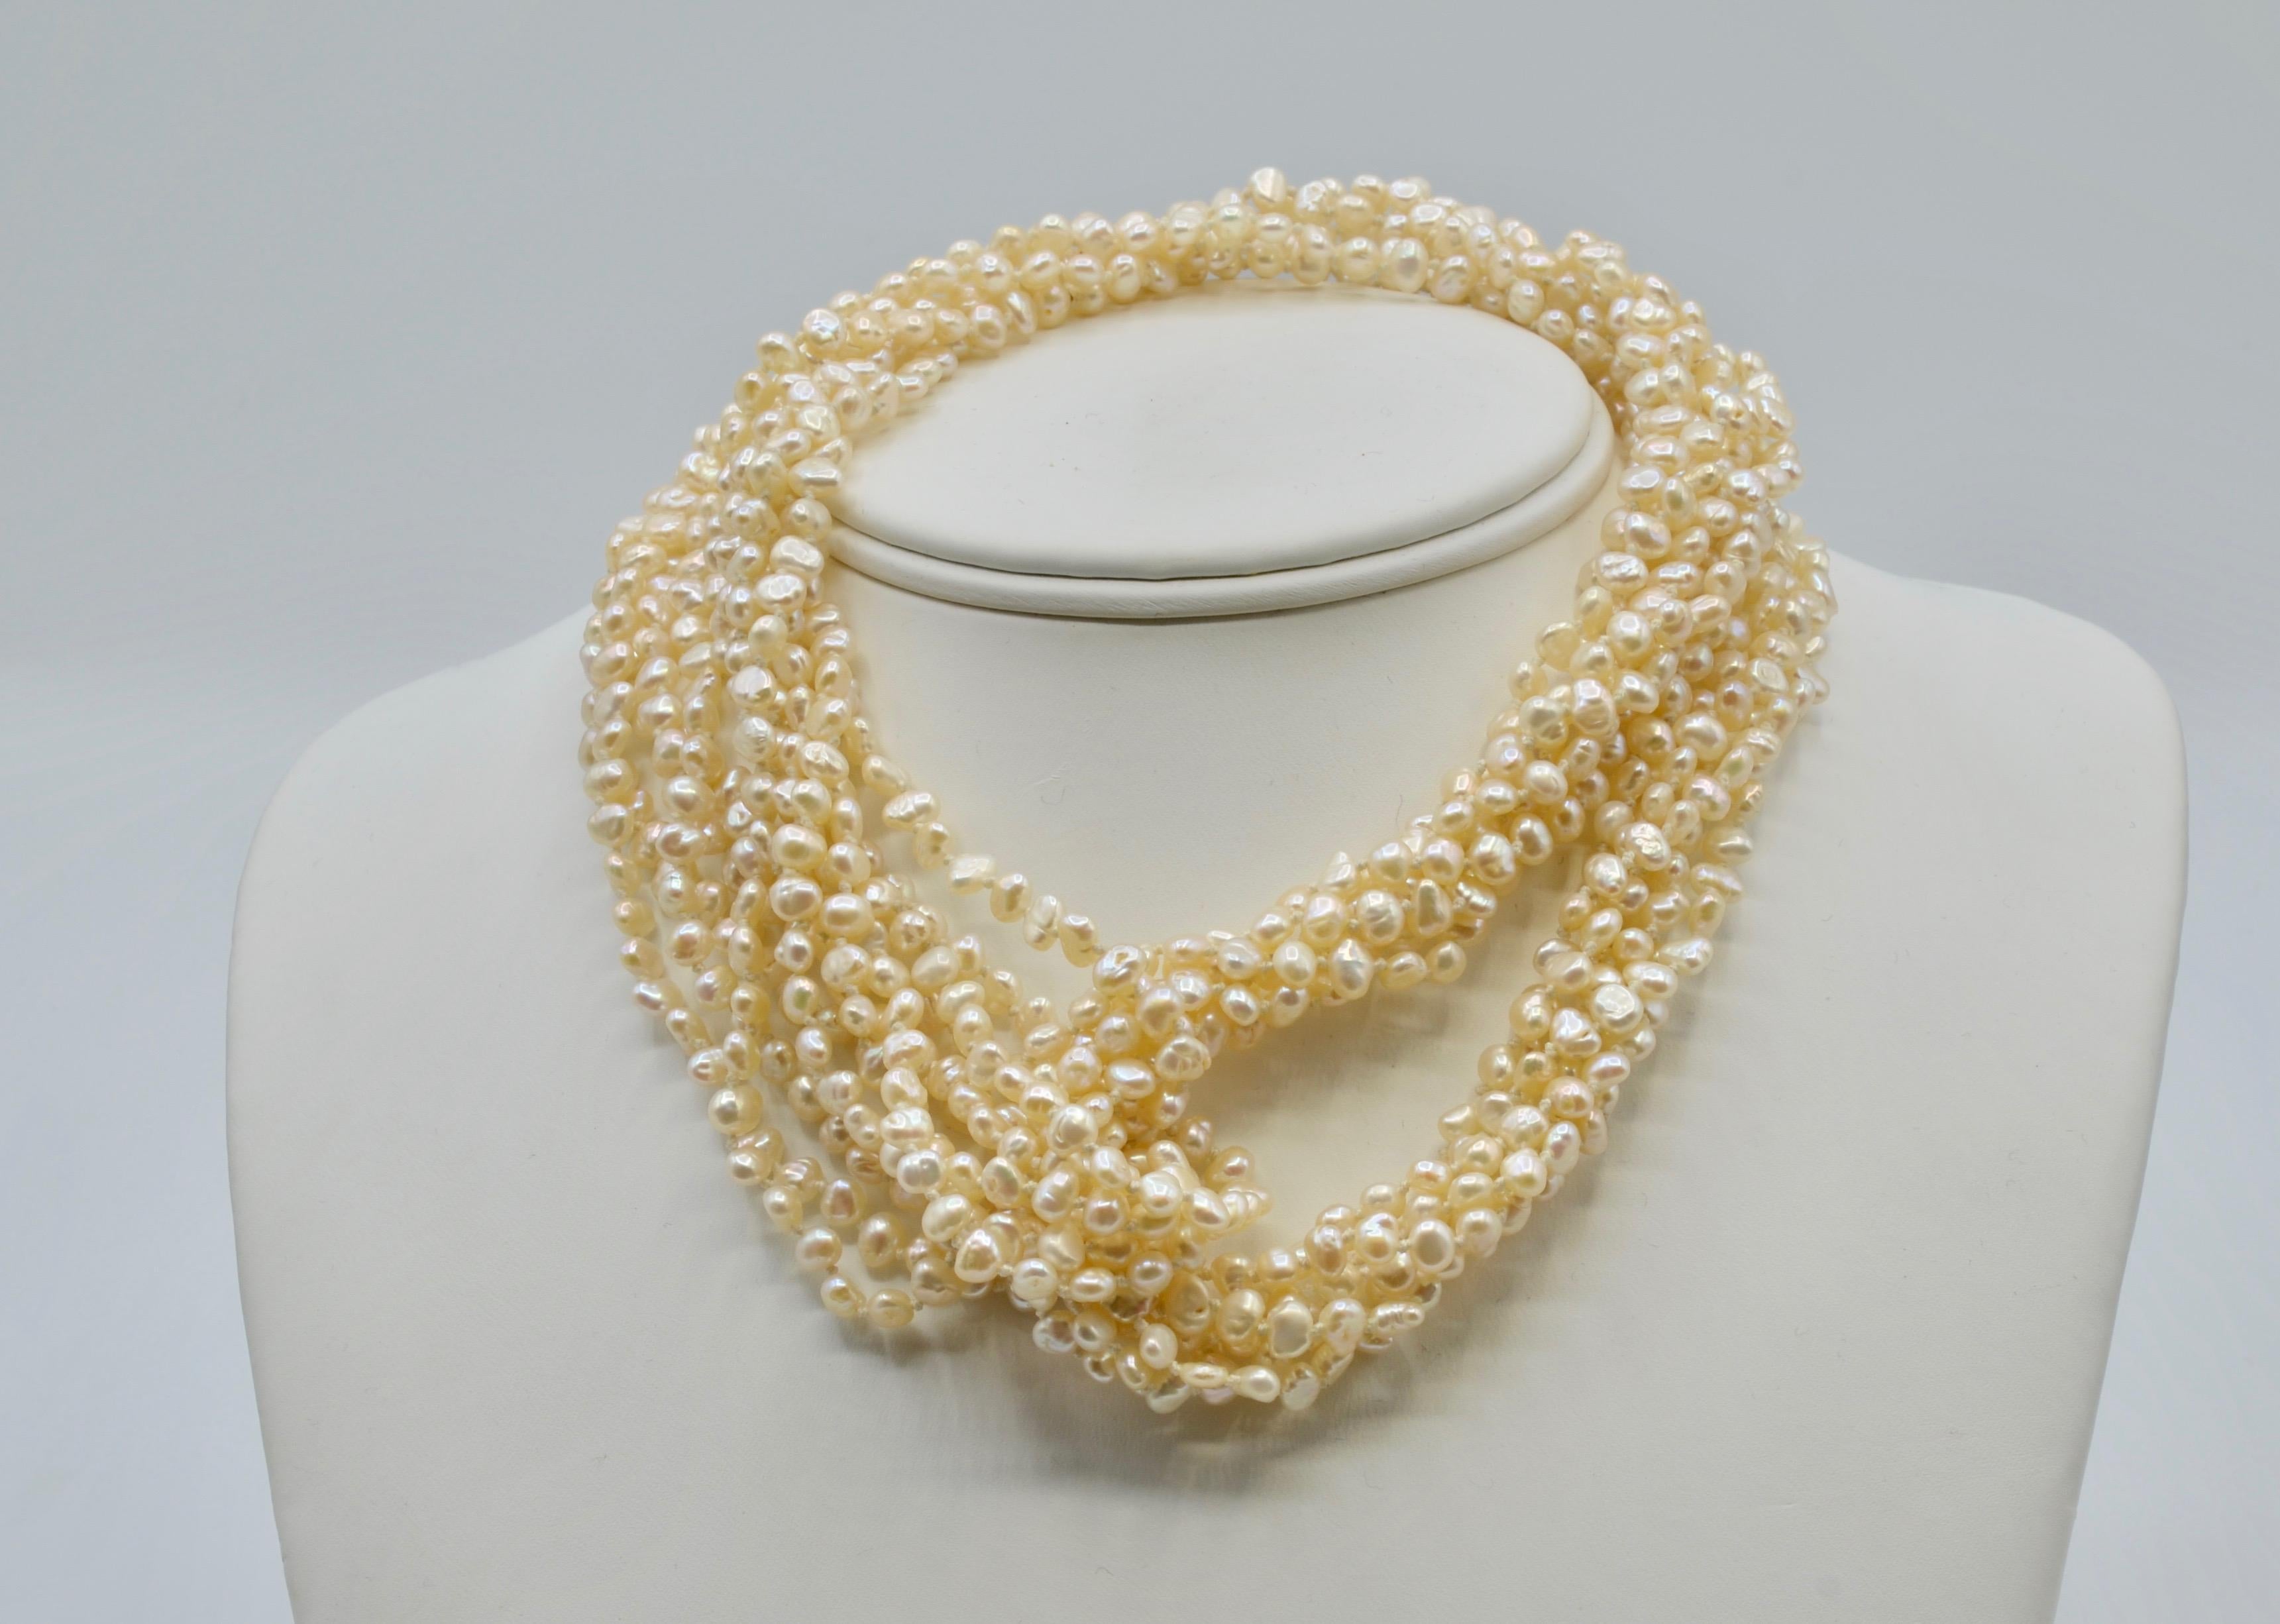 This Freshwater Pearl long multistrand necklace is a great accent to any outfit. The necklace can be worn long with a dress or double up for a dramatic neckline detail. The 14 karat yellow gold clasp has a secure safety and would look fabulous in